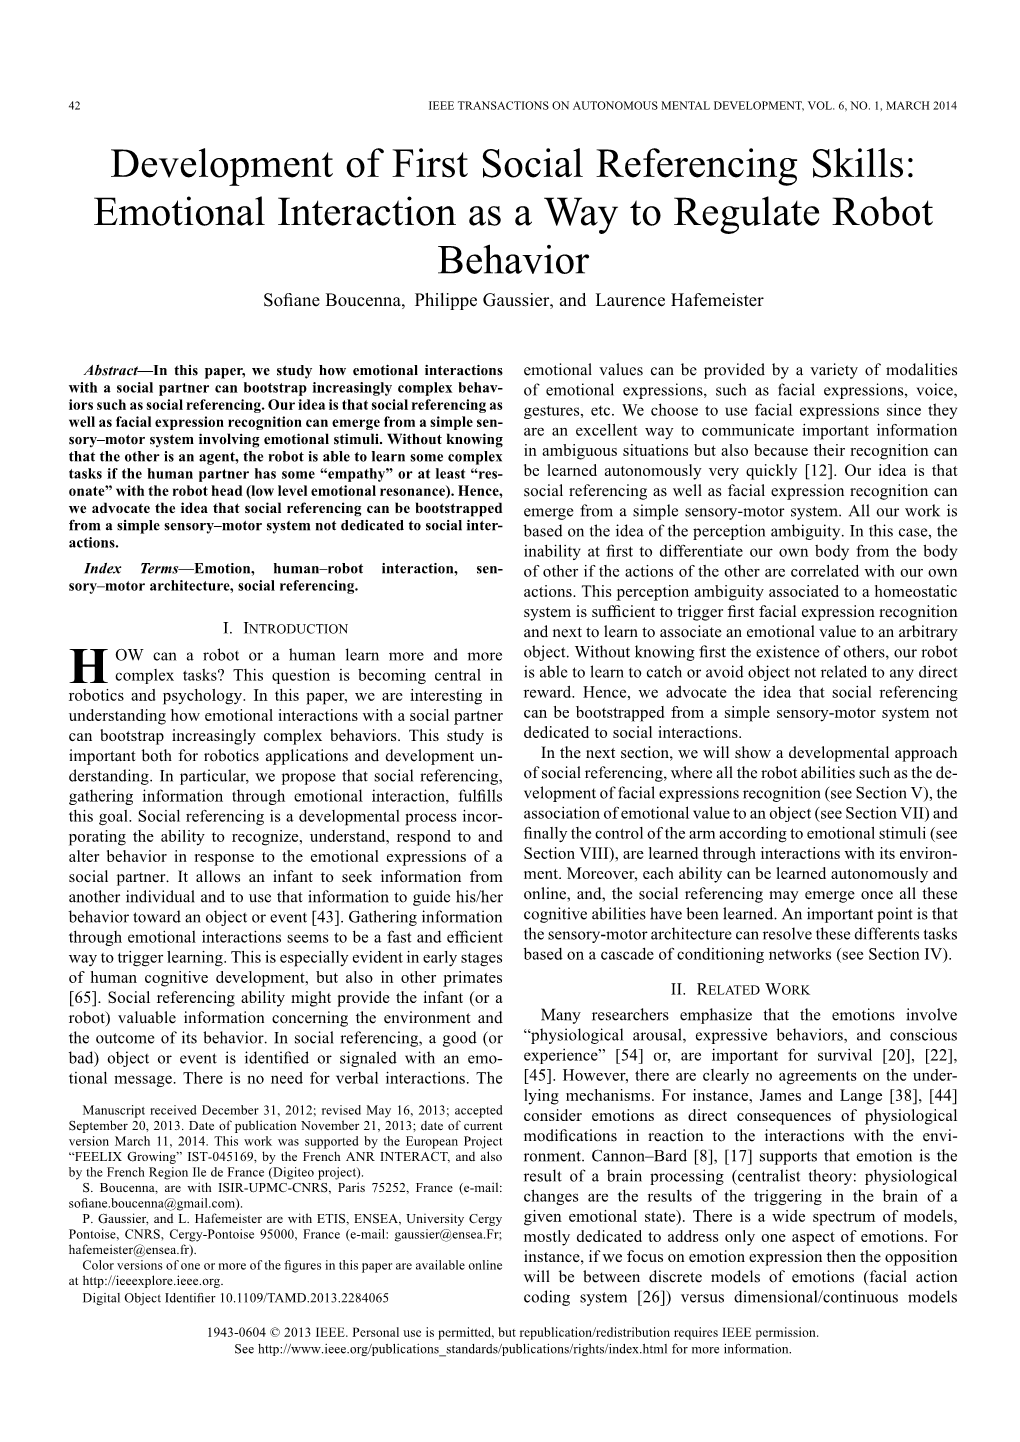 Emotional Interaction As a Way to Regulate Robot Behavior Soﬁane Boucenna, Philippe Gaussier, and Laurence Hafemeister